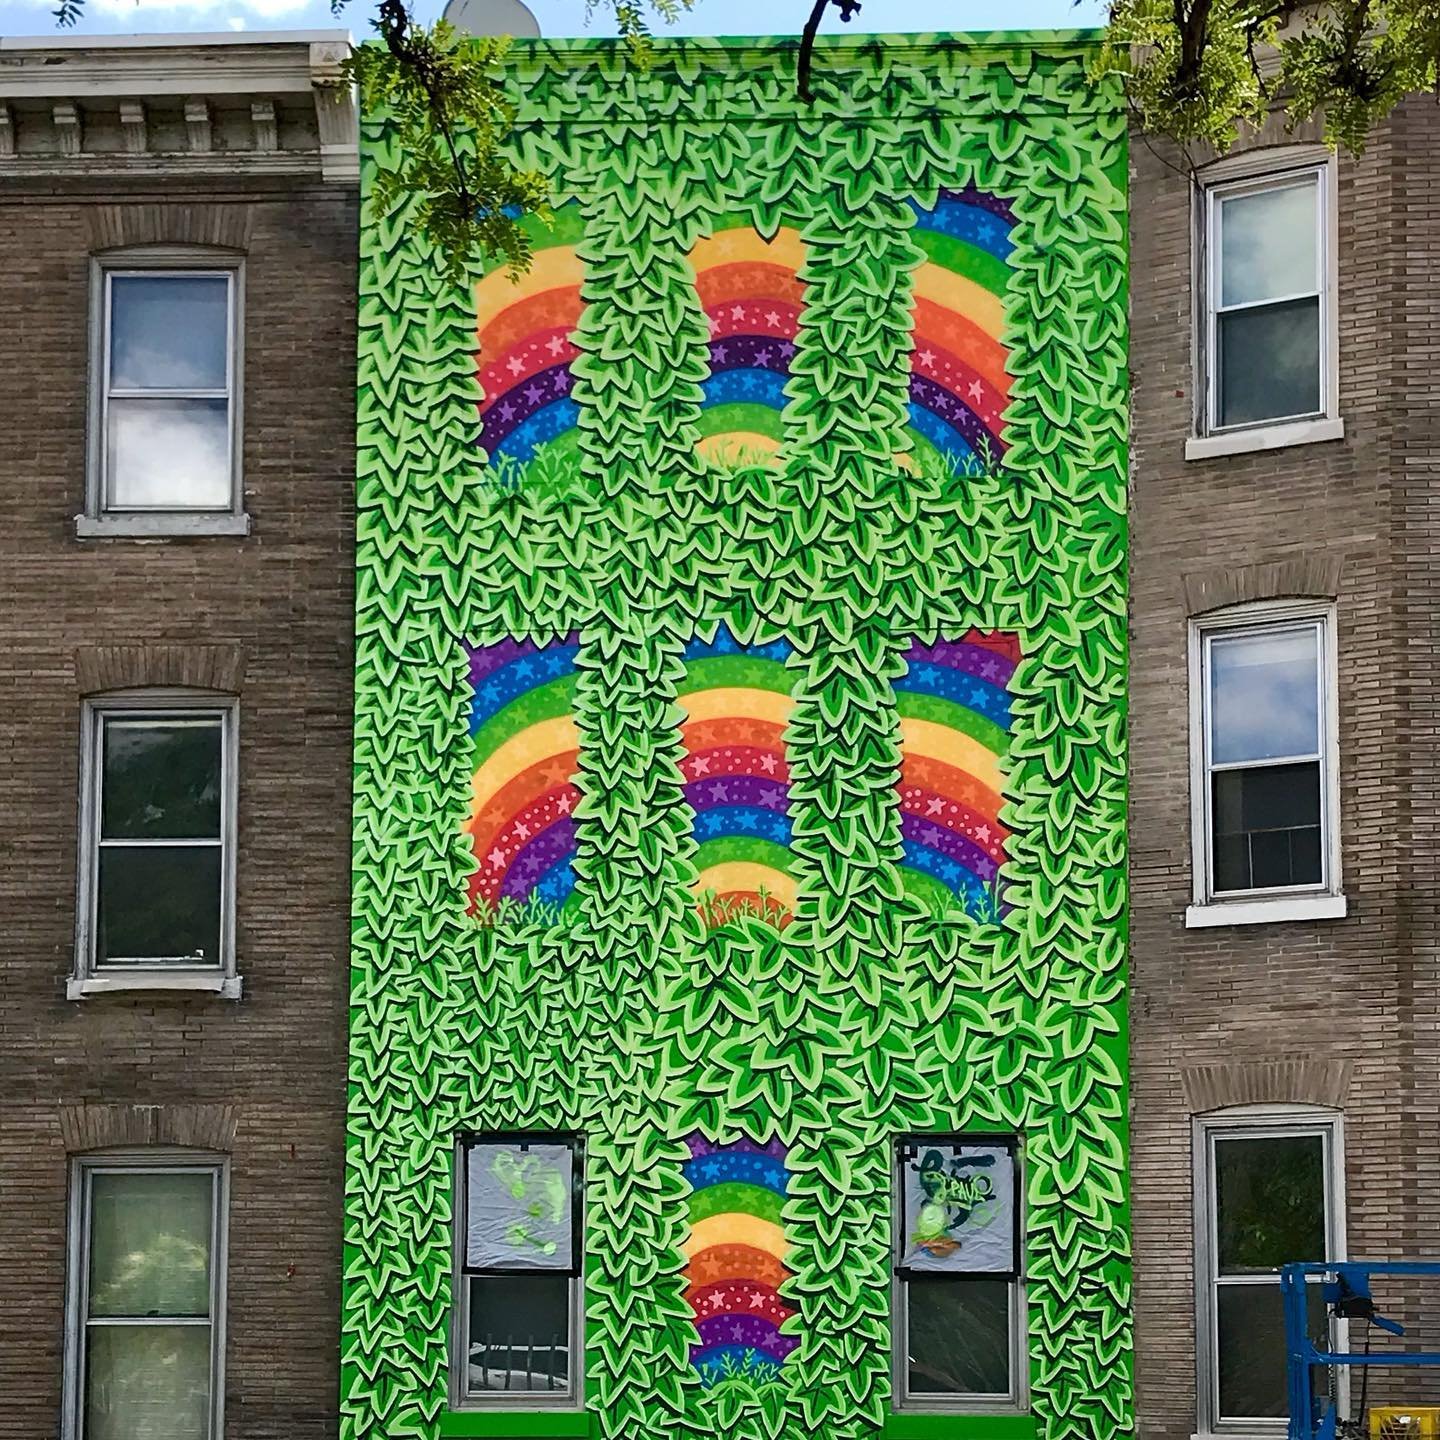 Ivy Wall from 2019 :)
Lotsa fun out in Easton for this one, hadn&rsquo;t really done anything this big but these guys had faith in me and I&rsquo;m thankful :)
&bull;finished mural (3 stories on unused property)
&bull;woodcut print inspiration, avail